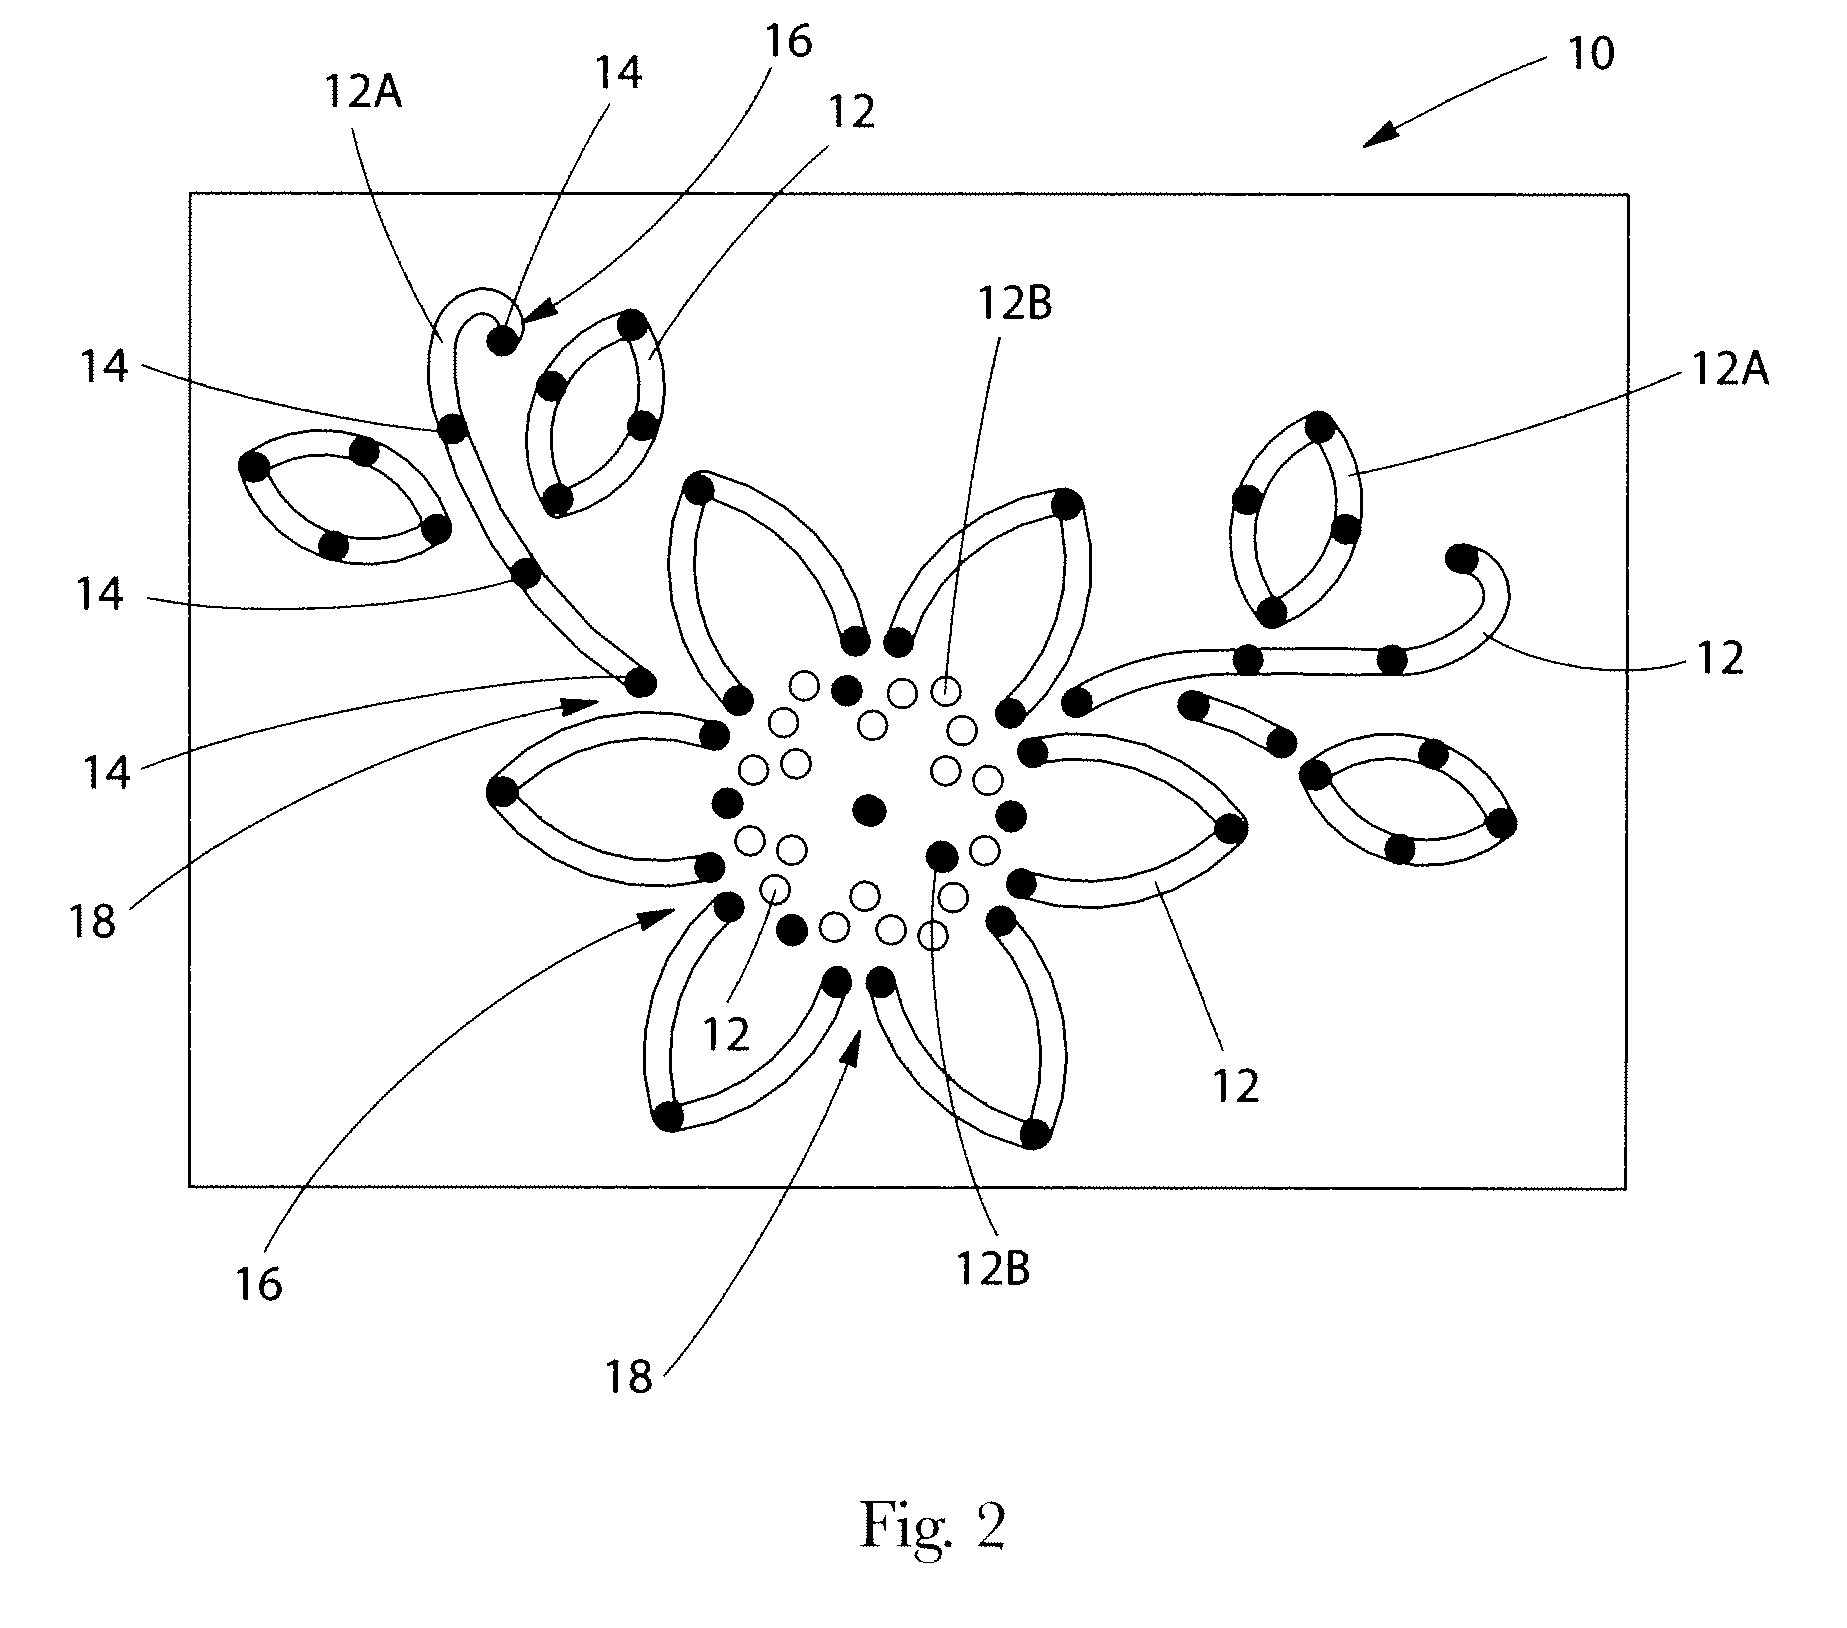 Multi-ply fibrous structures and methods for making same